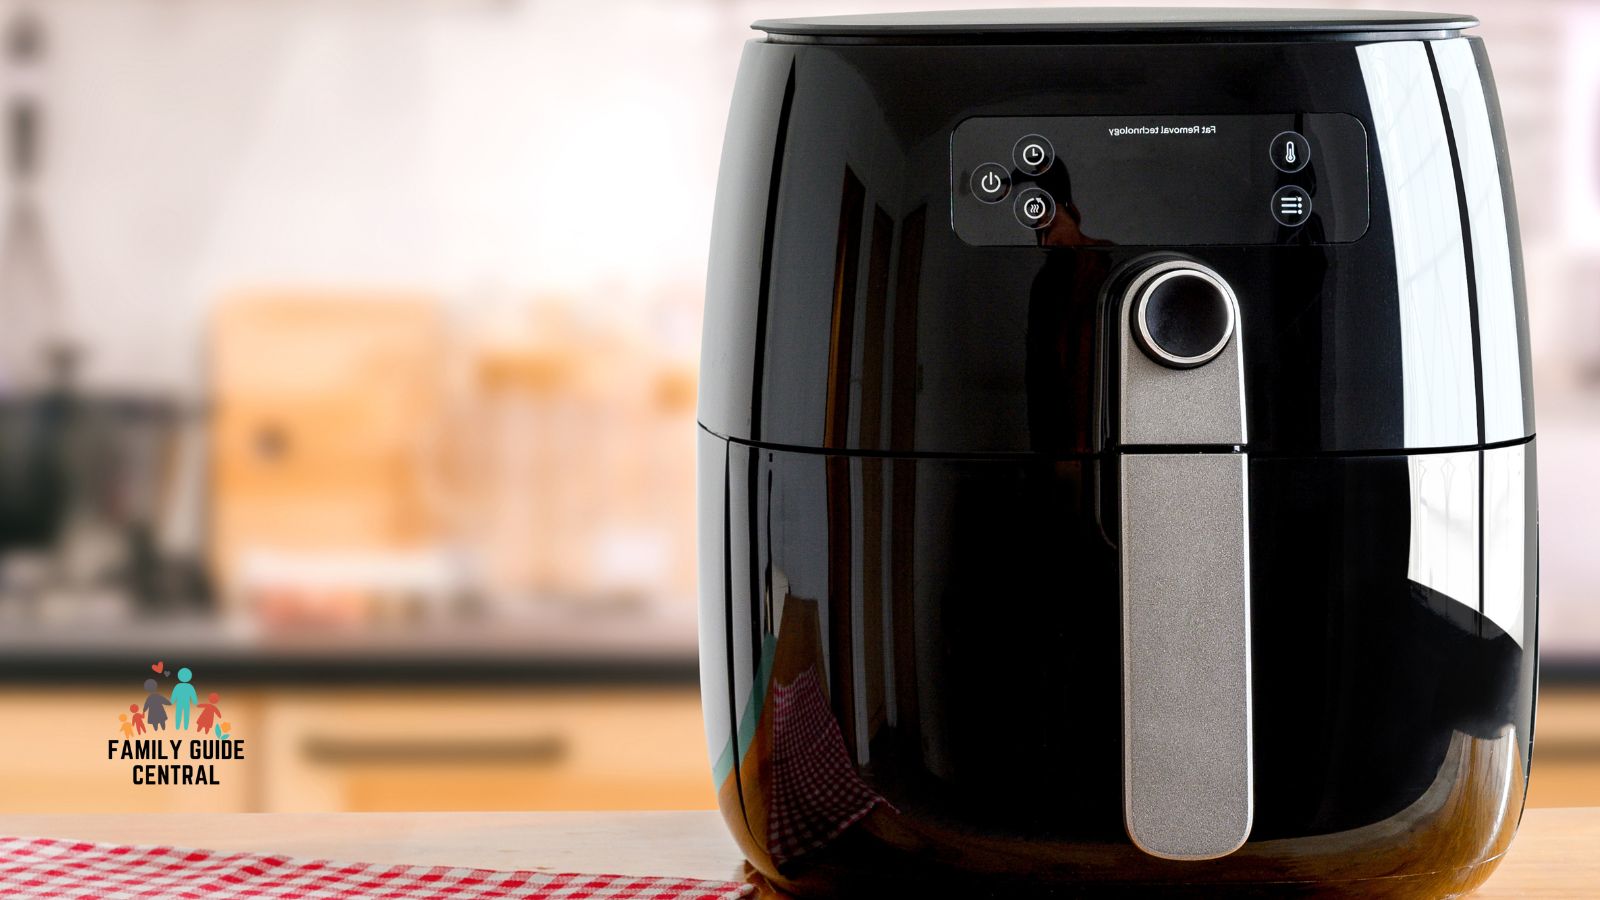 Air fryer in front of kitchen - familyguidecentral.com